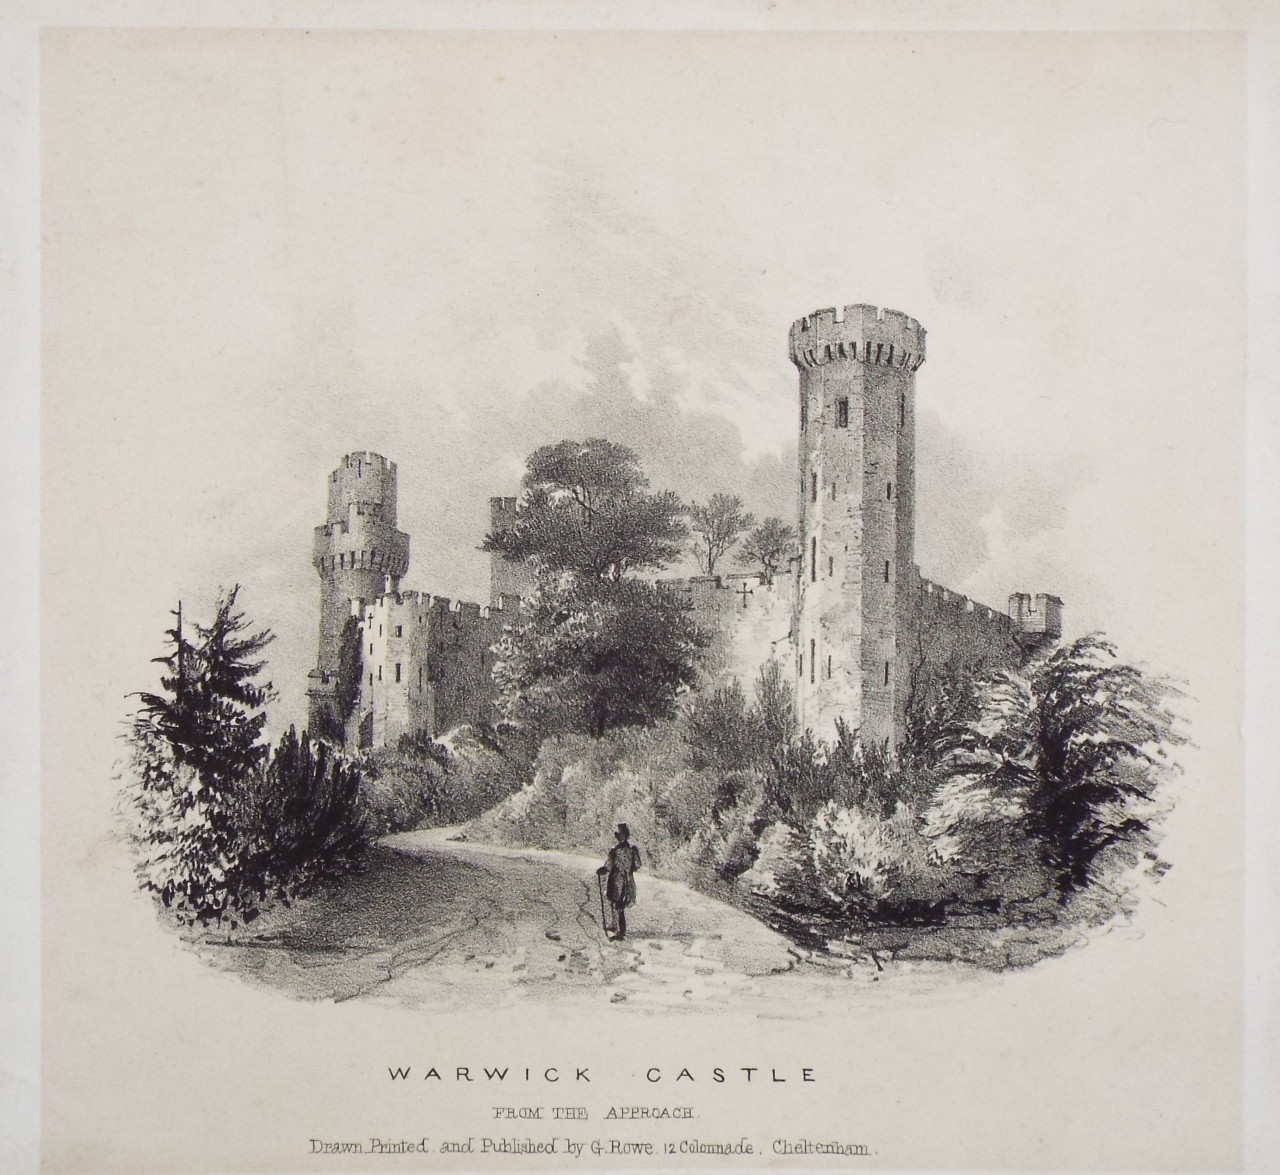 Lithograph - Warwick Castle From the Approach - Rowe